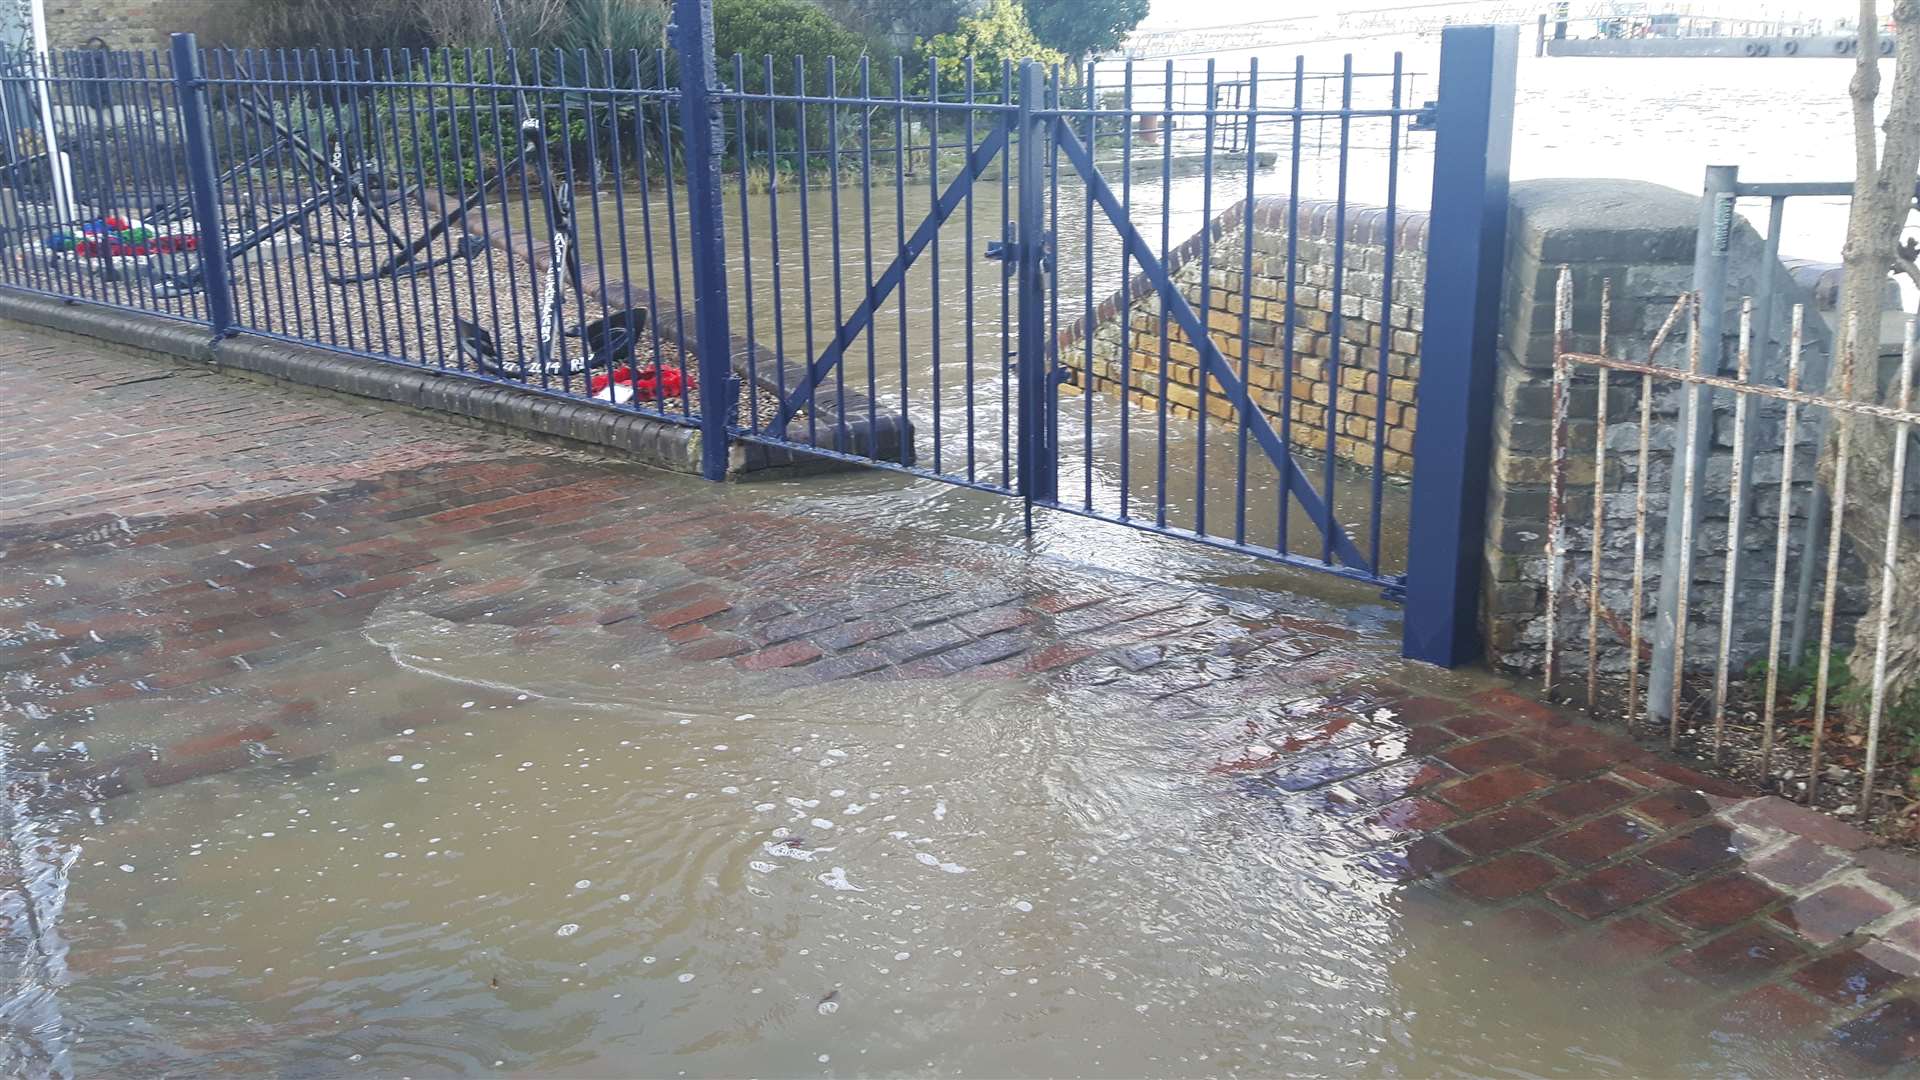 A tidal surge has caused flooding in Gravesend